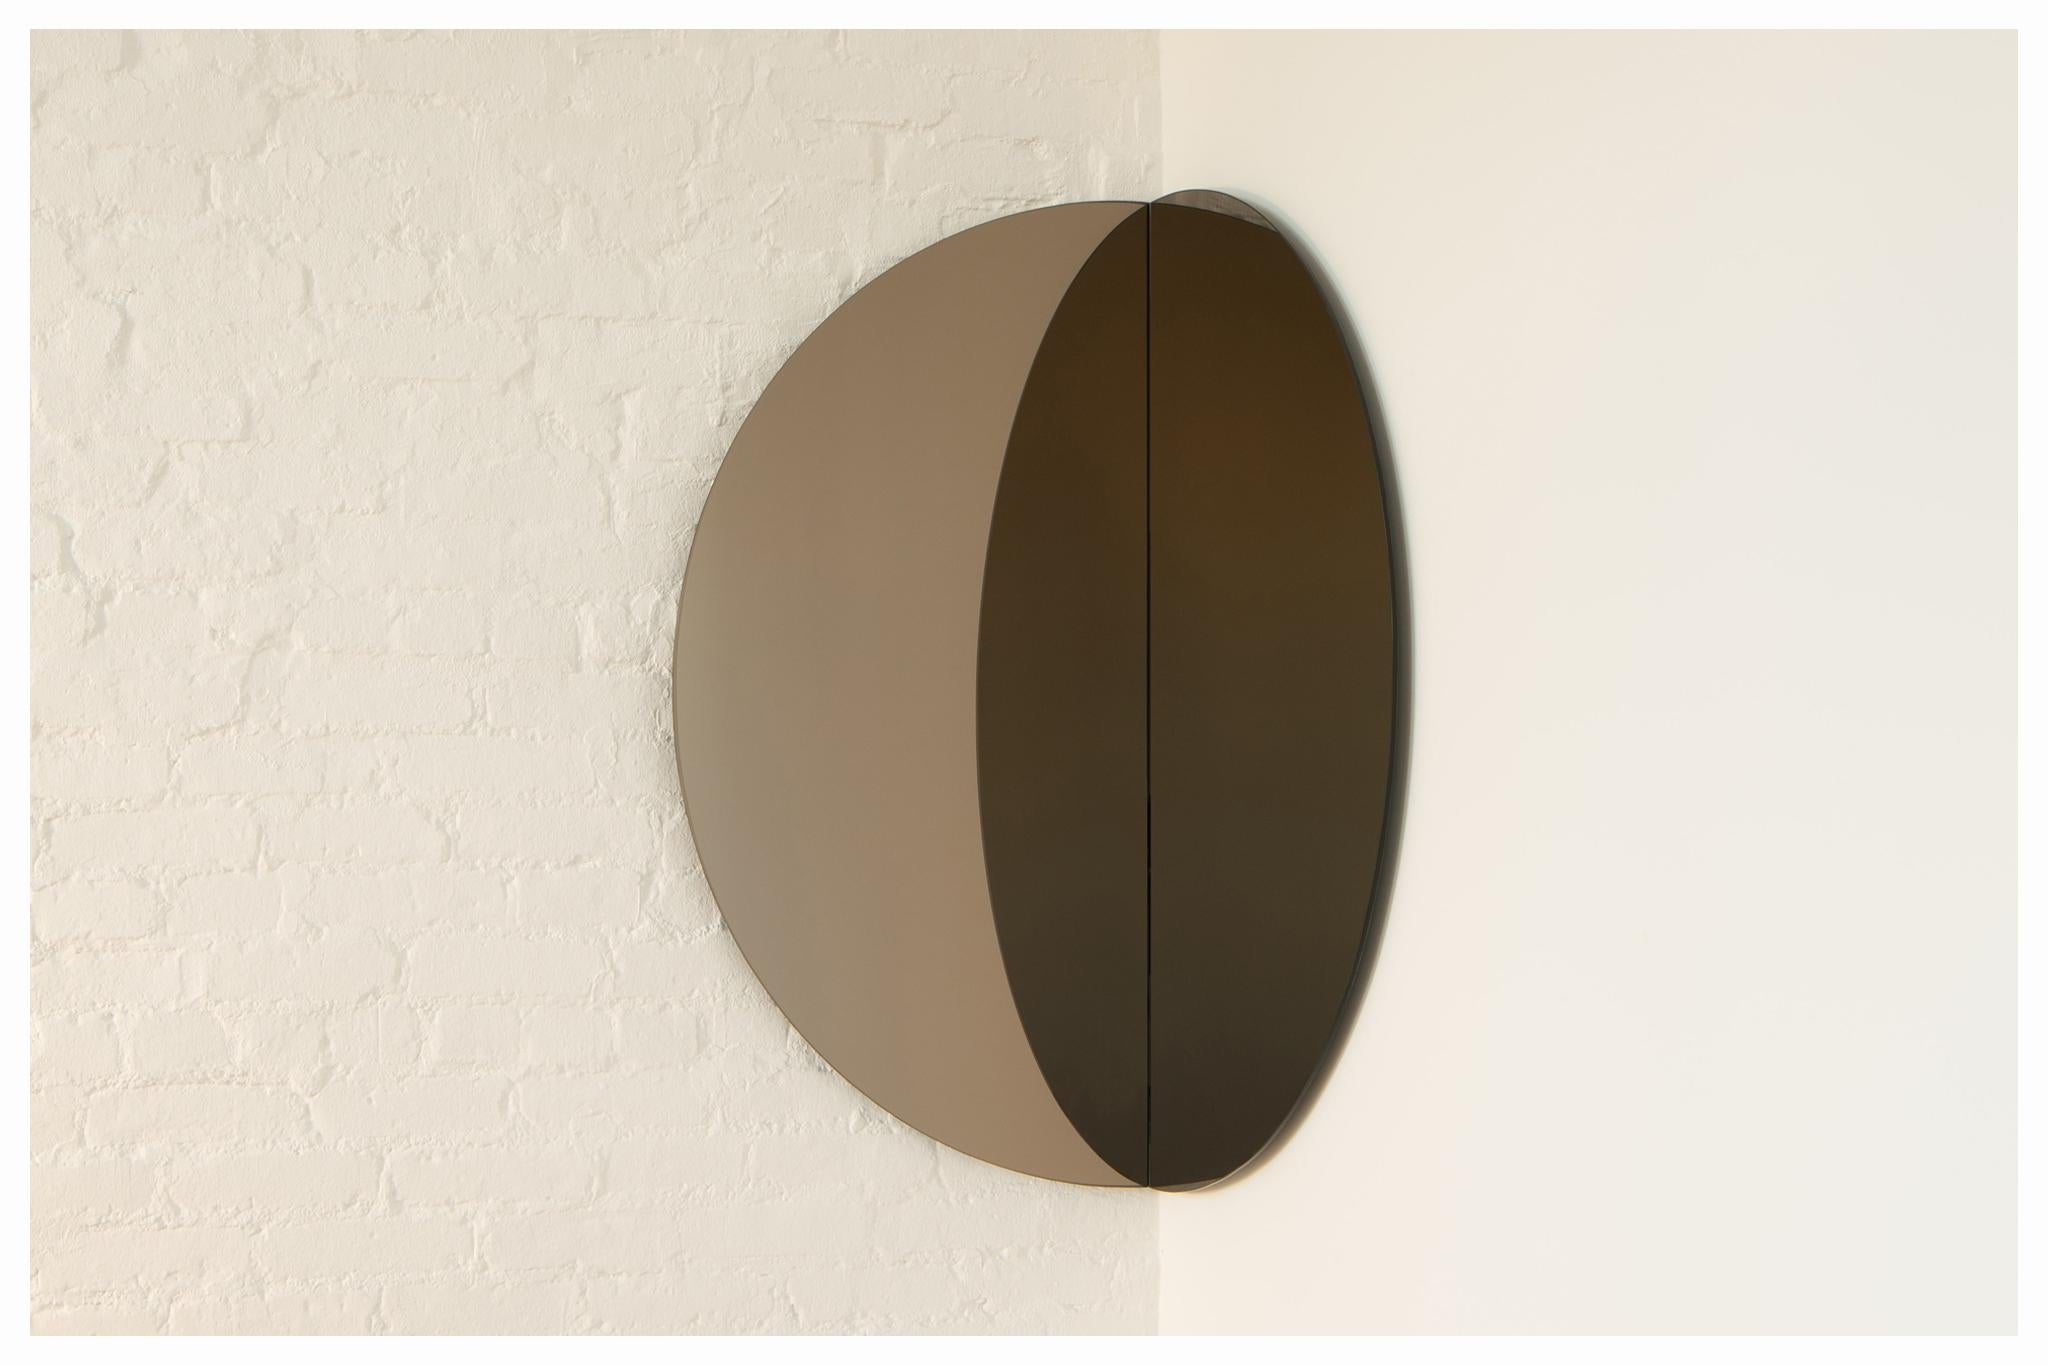 Portal mirror by Jude Di Leo
Dimensions: 
21”W x 21”W x 42”H 
36”W x 36”W x 72”H 
Materials: Bronze mirror, hidden wall cleat.
With or without dimmable LED backlight. 

The reflecting mirror-on-mirror gives Portal the illusion of a gateway into